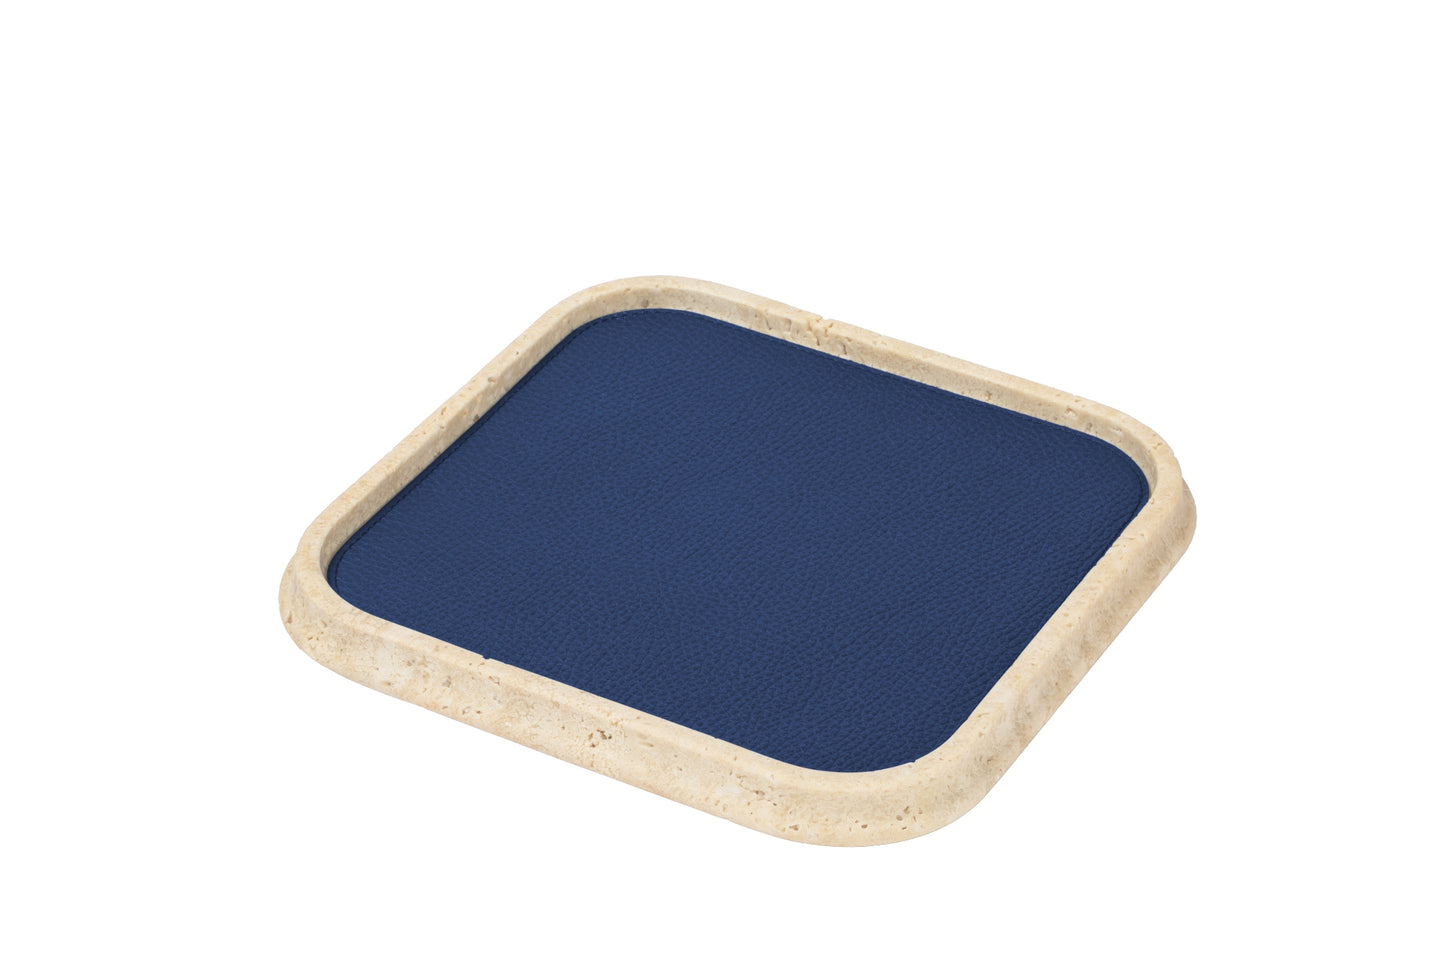 Giobagnara Rodi Marble Valet Tray Square | Elegant Design with Essential Lines and Soft Volumes | Crafted from Beautiful Travertine | Available in Various Nuances | Removable Leather Placemats for Added Versatility | Stylish Home Organization | Explore a Range of Luxury Home Decor at 2Jour Concierge, #1 luxury high-end gift & lifestyle shop